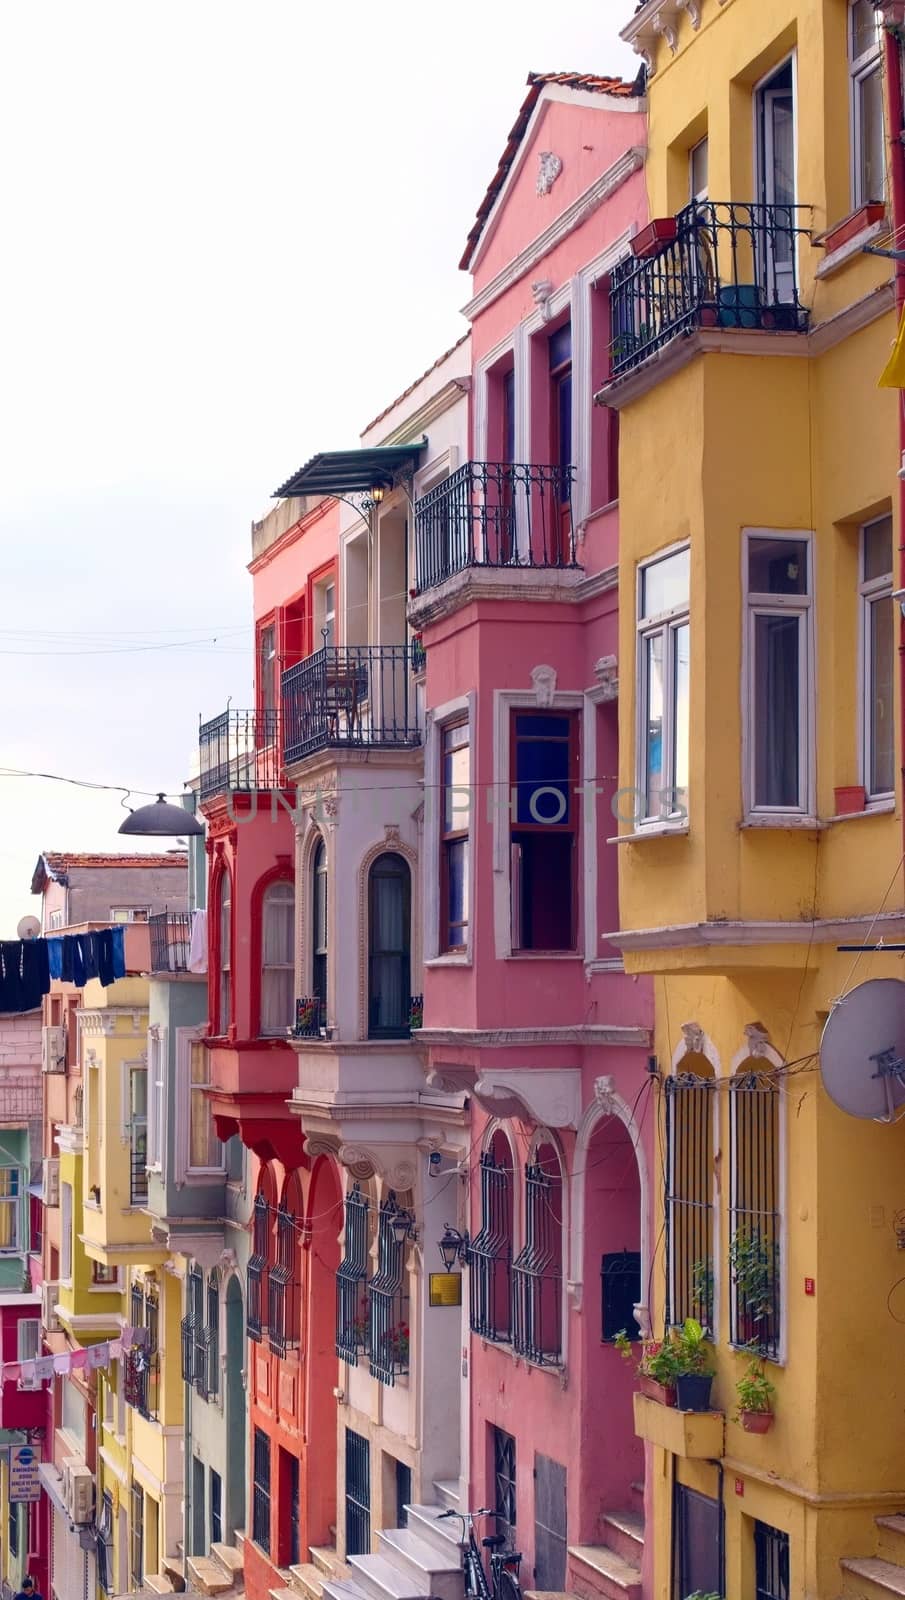 Colorful facades at the Sultanahmet district in Istambul, Turkey.